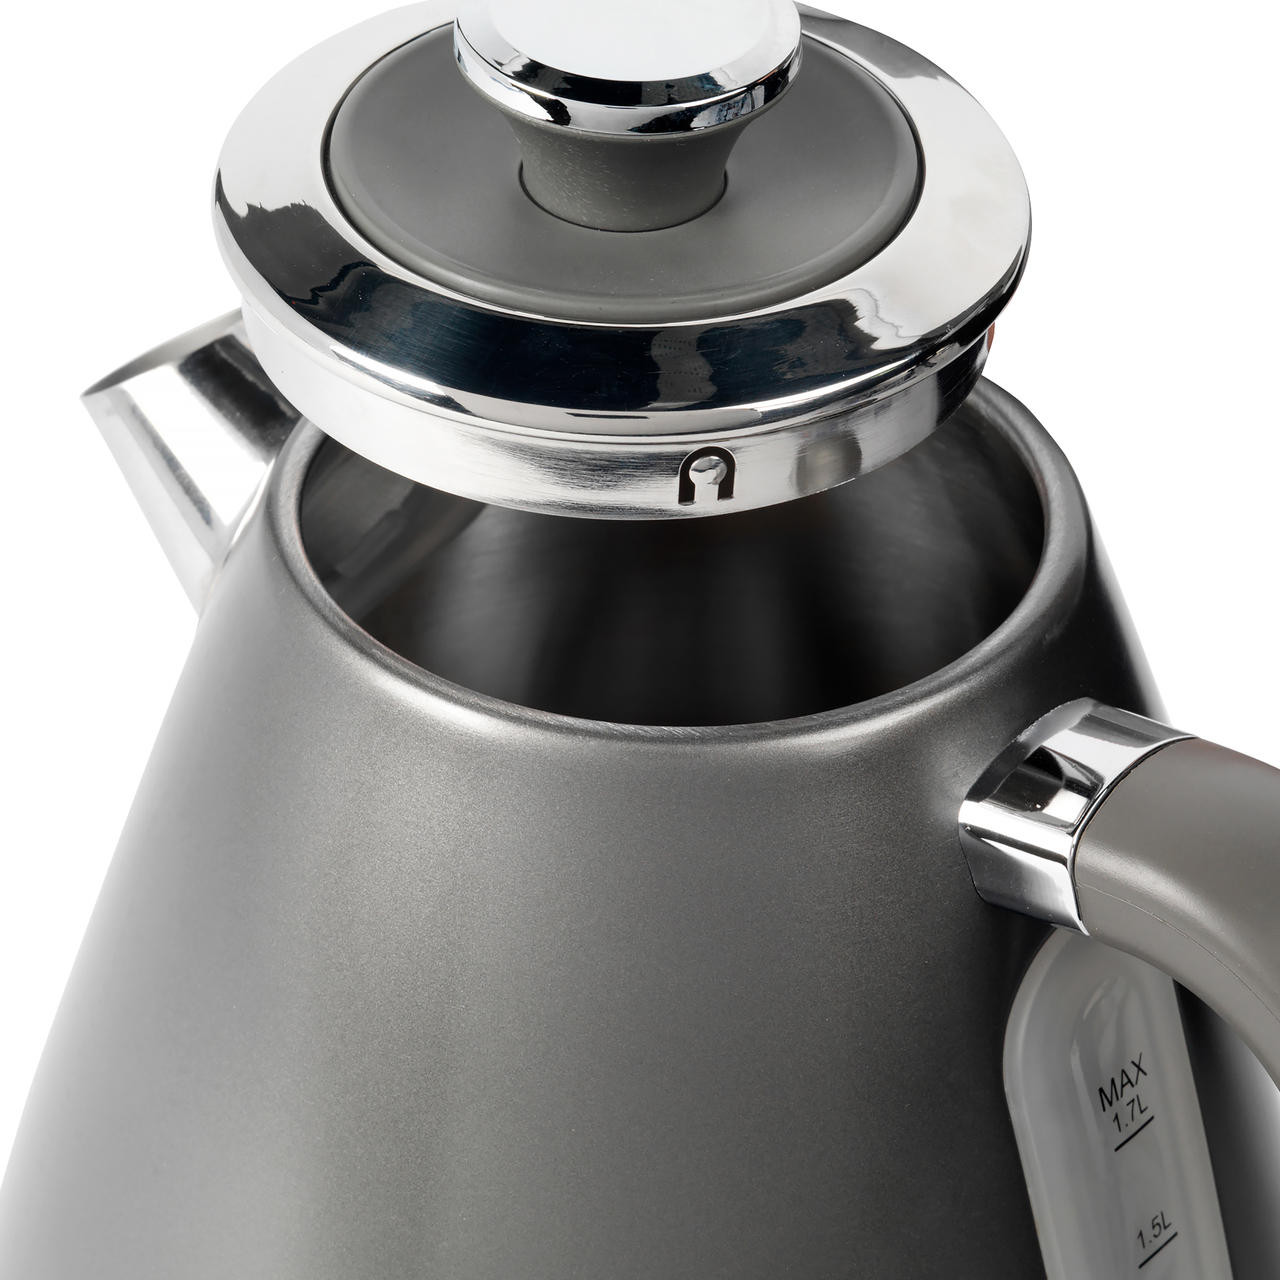 Unboxing Basics Stainless Steel Portable Electric Hot Water Kettle - 1  Ltr, Silver 